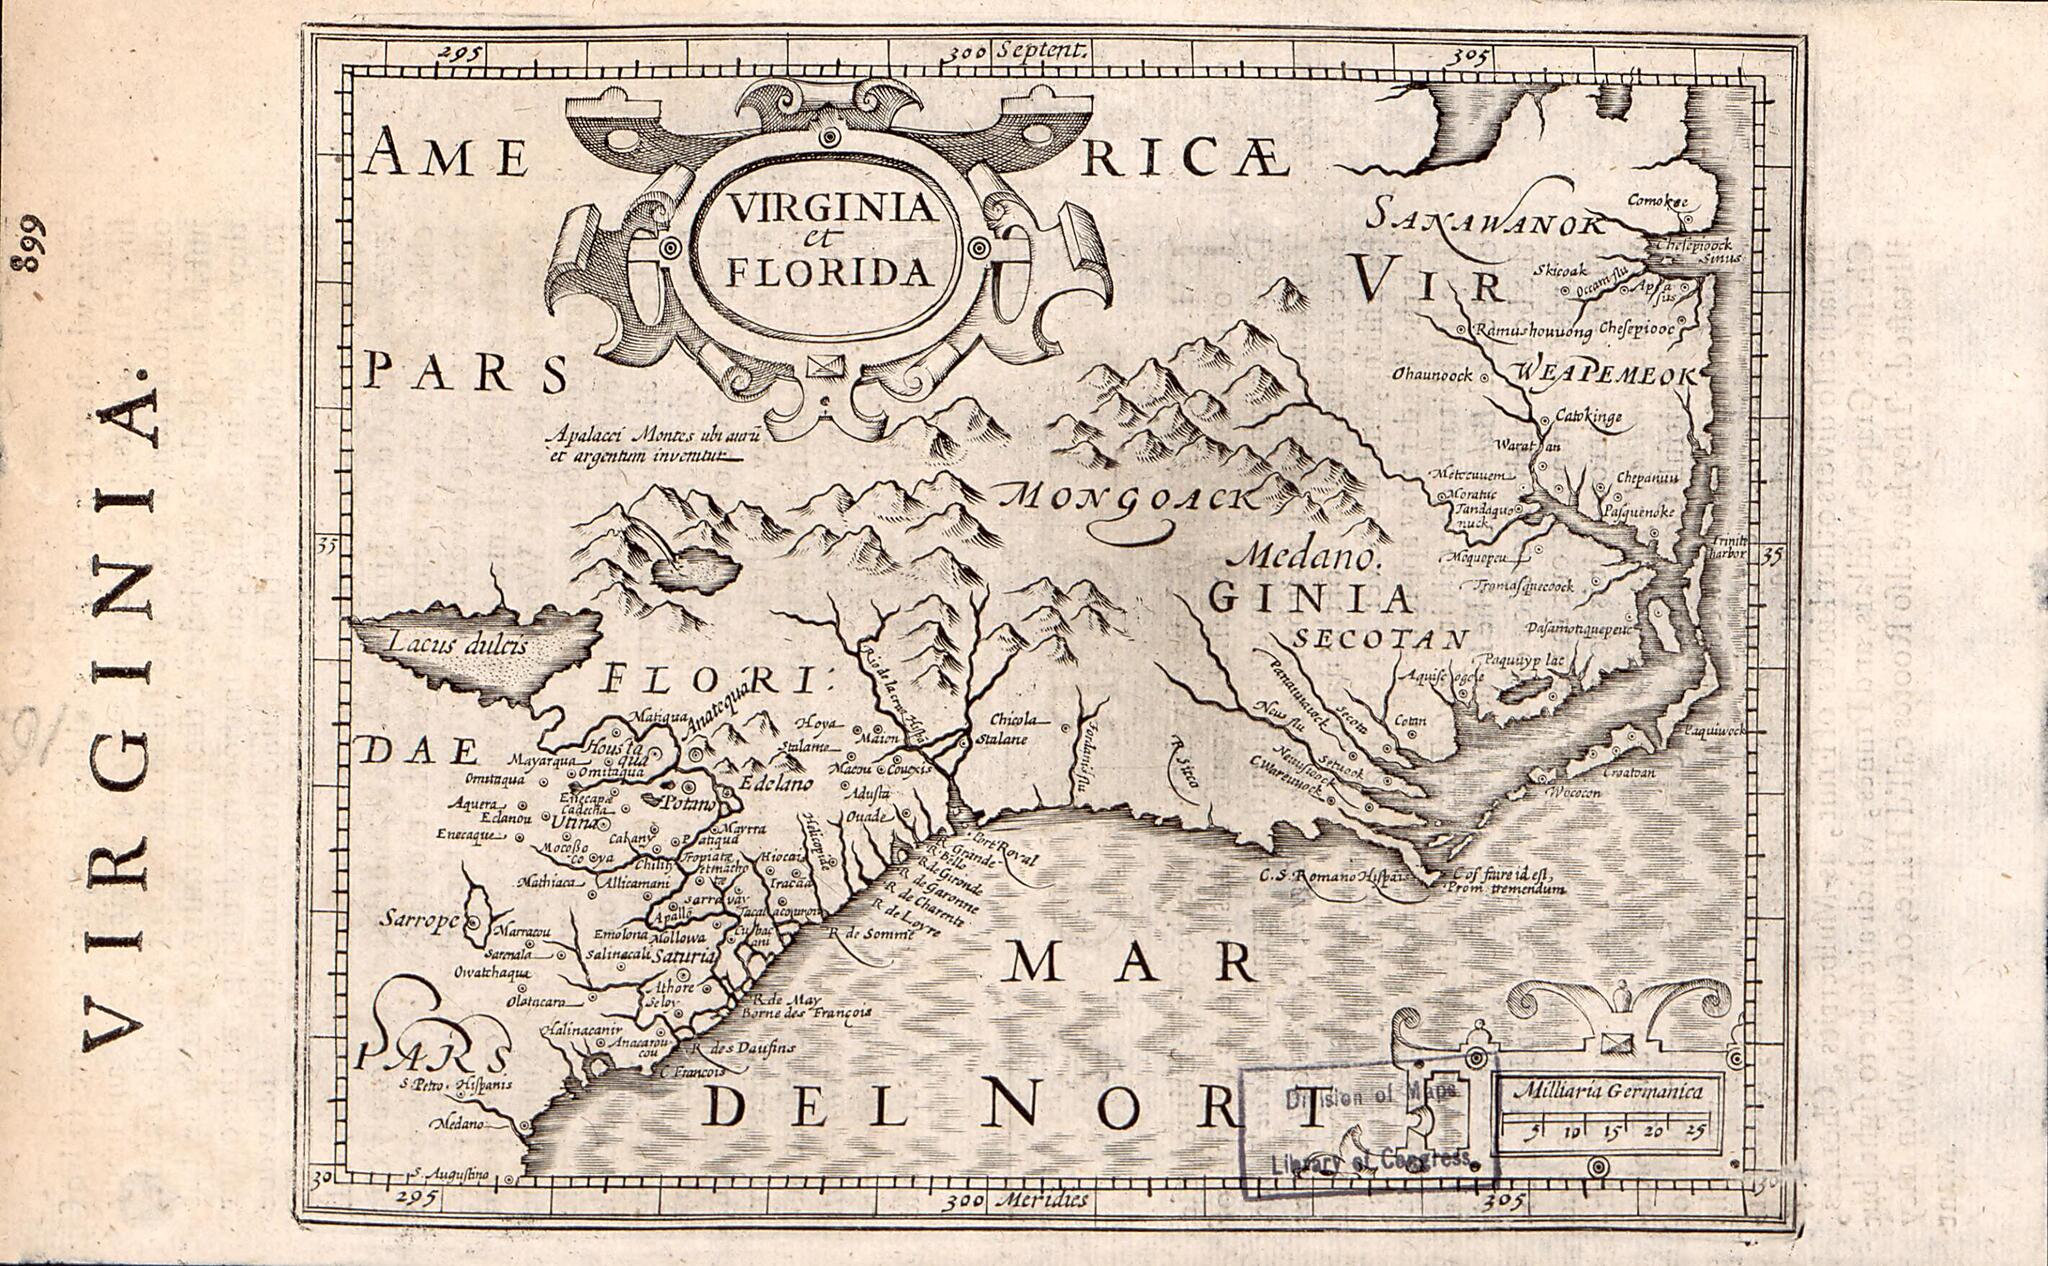 This old map of Virginia Et Florida. (Virginia) from 1637 was created by Gerard Mercator in 1637